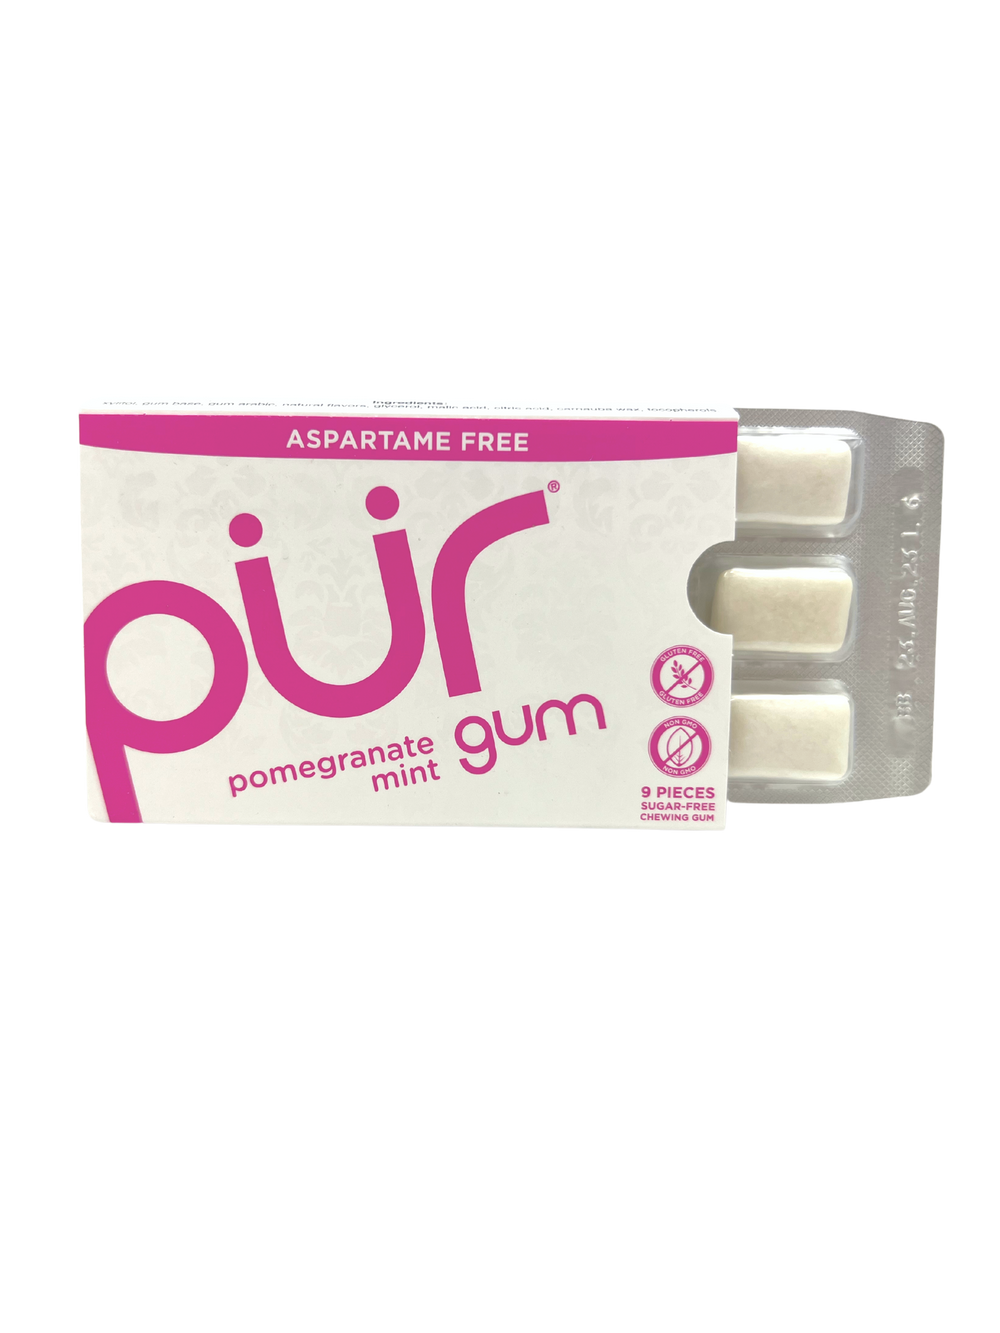 Pur Gum Pomegranate Mint - Country Life Natural Foods